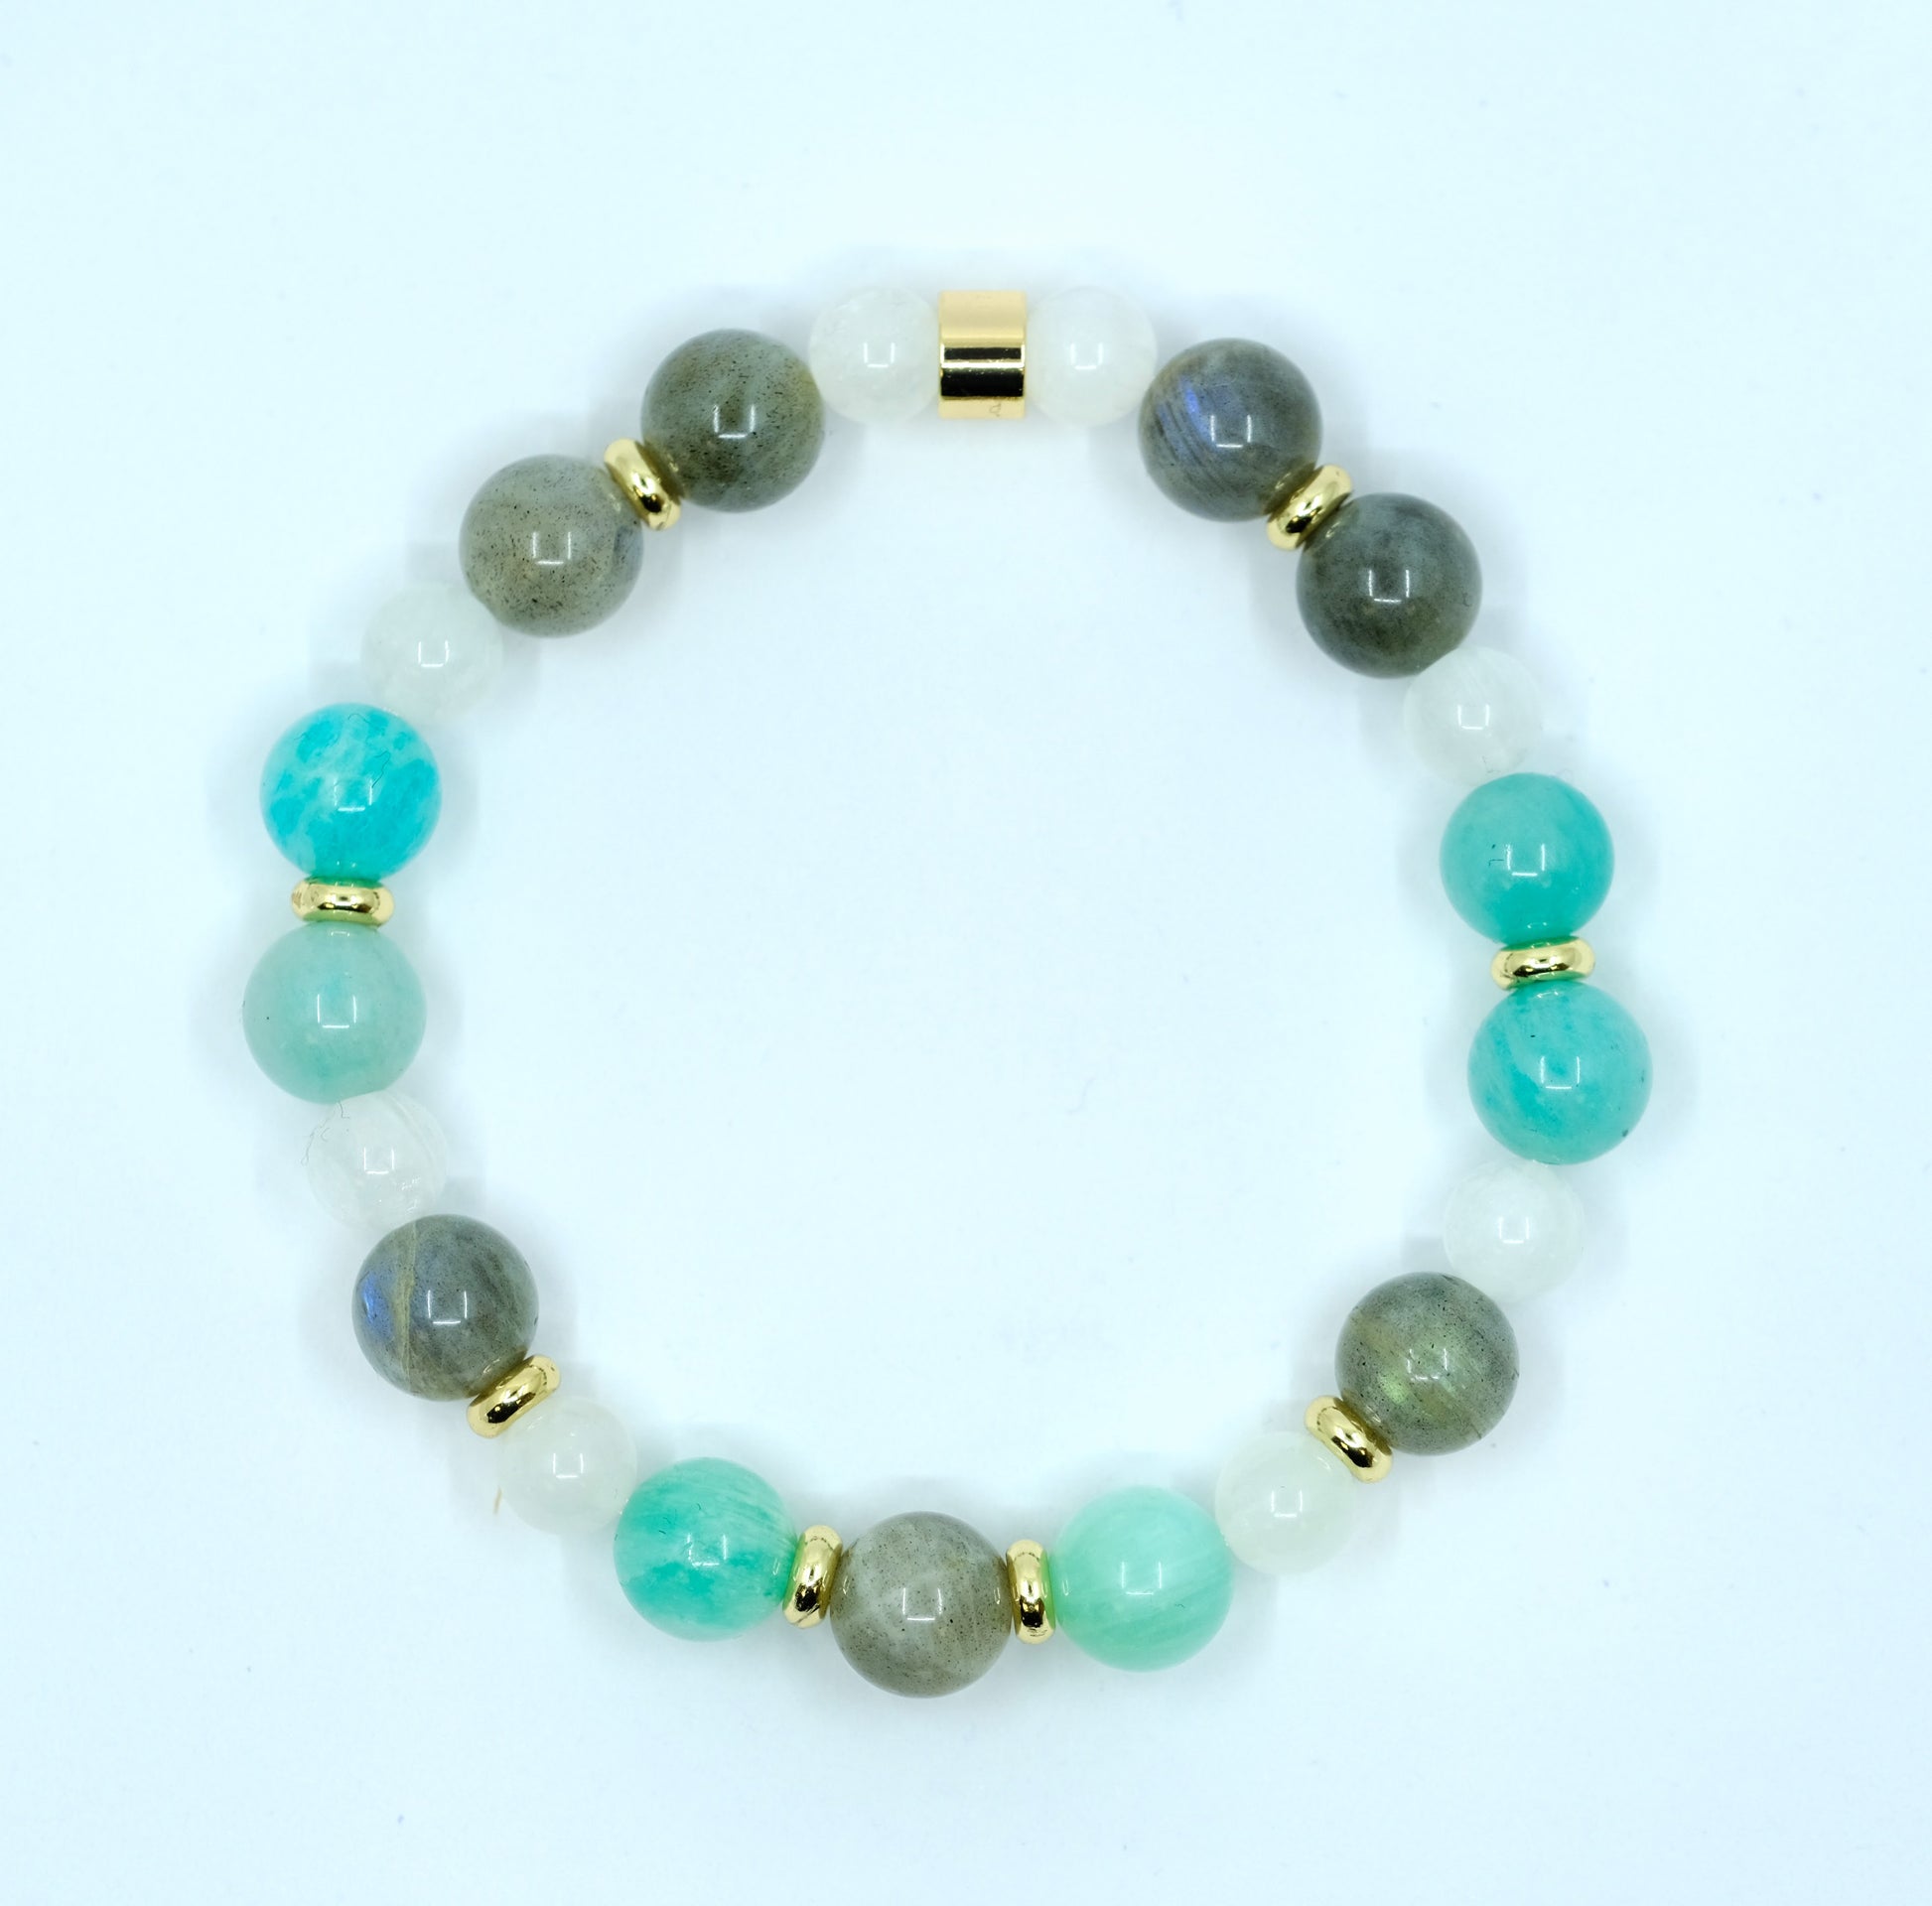 Moonstone, Labradorite and Amazonite bracelet with gold accents from above